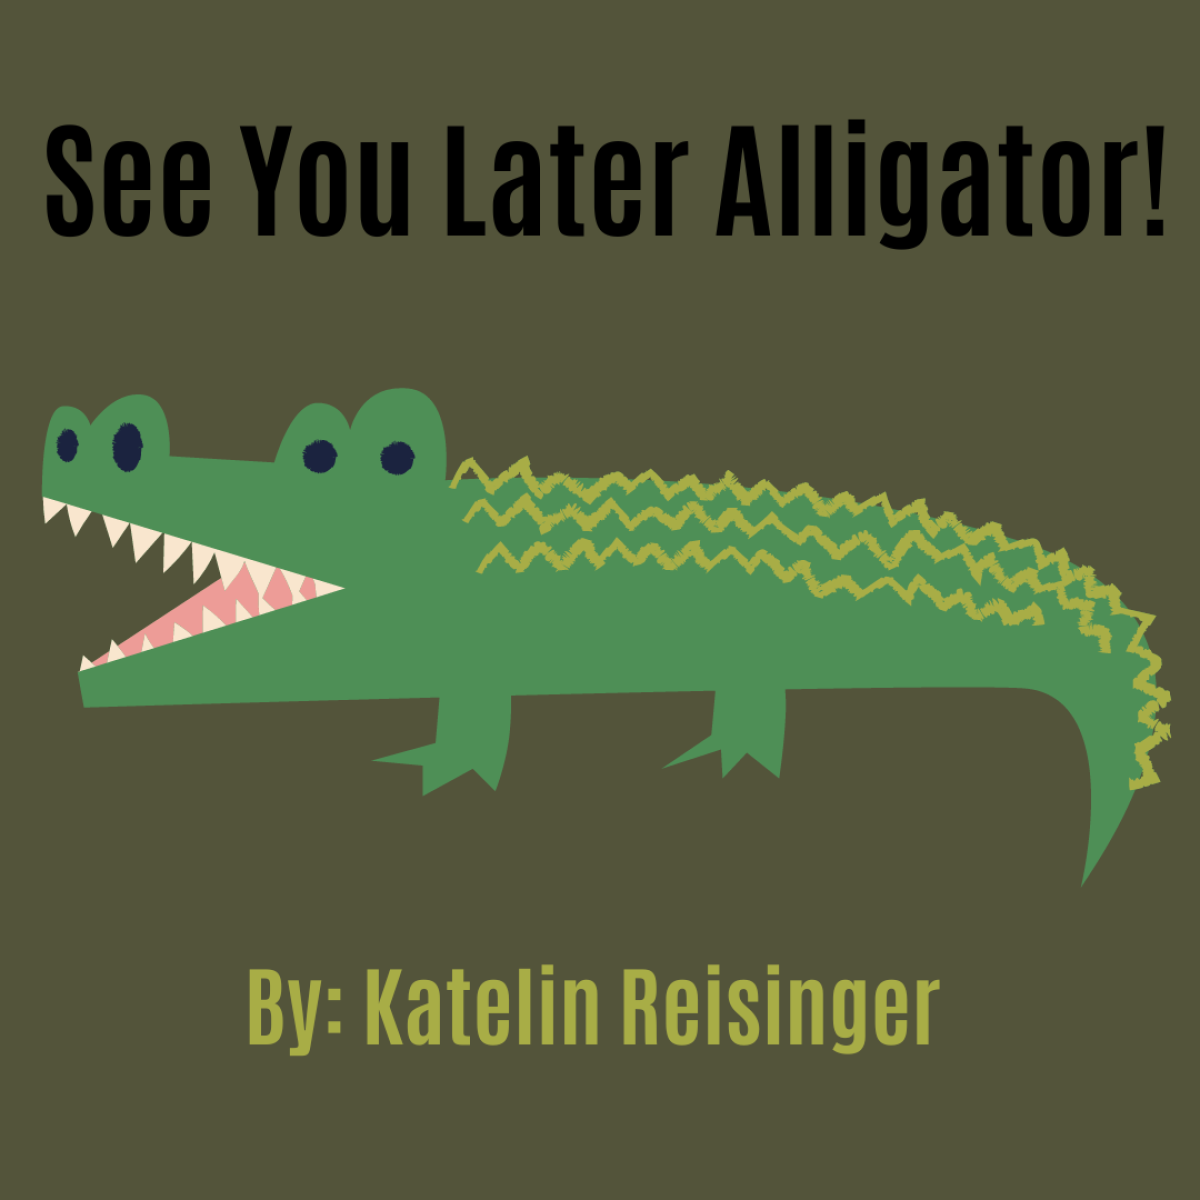 see you later alligator clipart